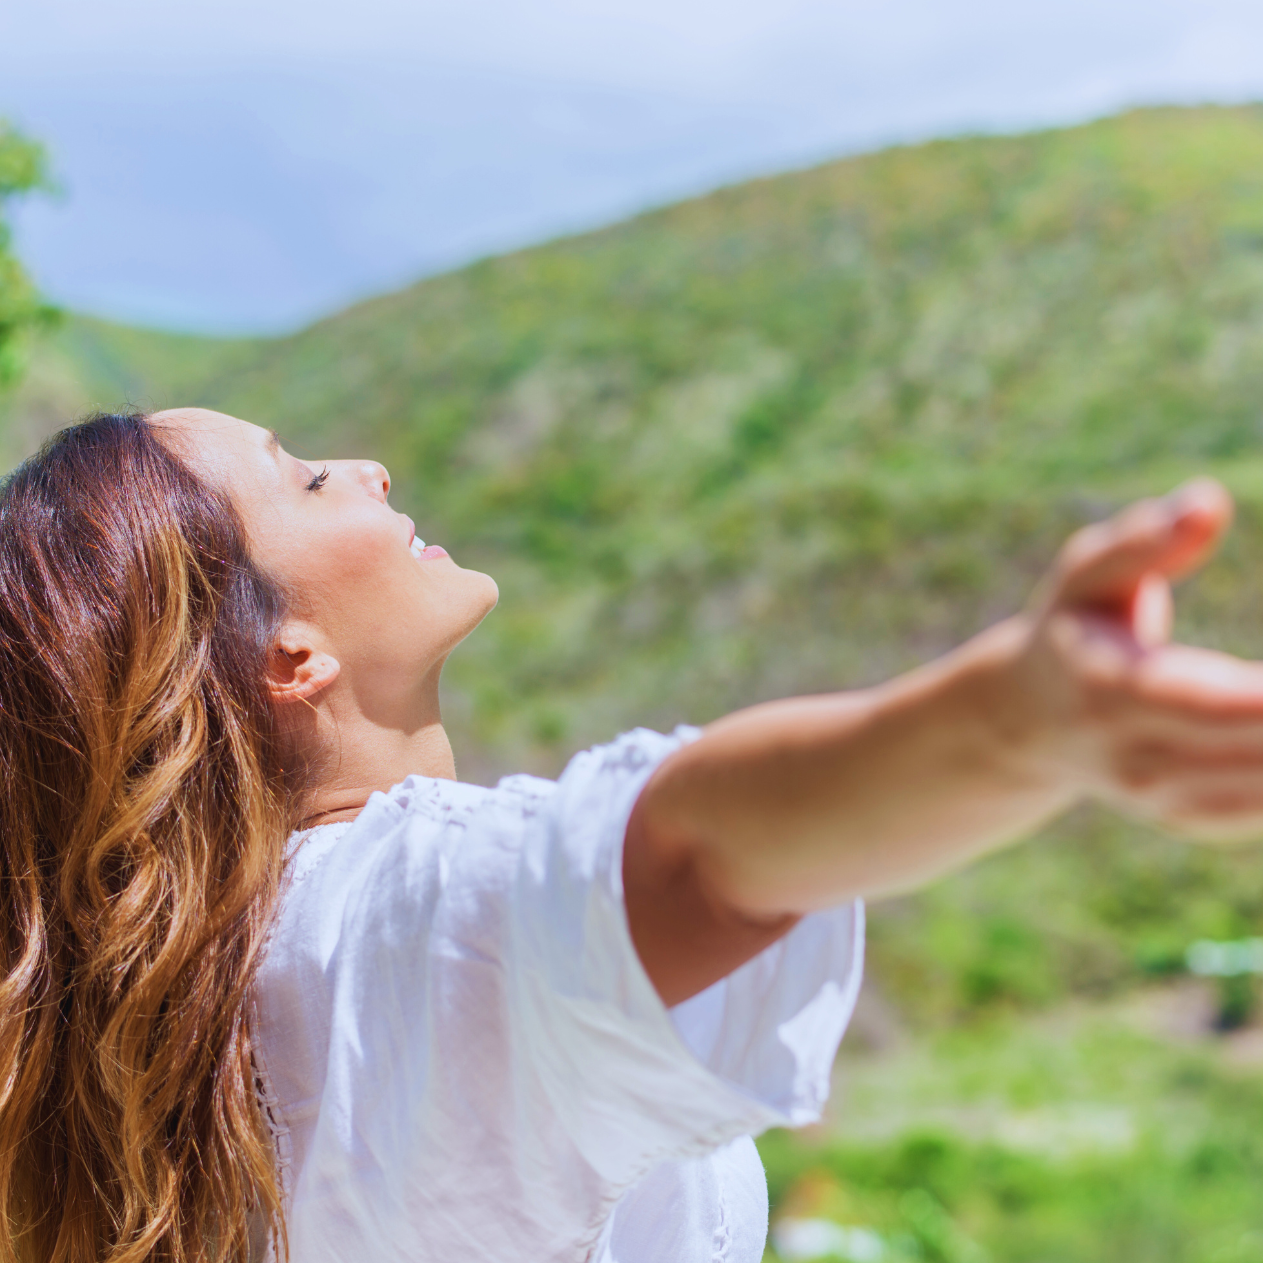 stock photo of woman with head tilted toward the sky, arms outstretched to her sides